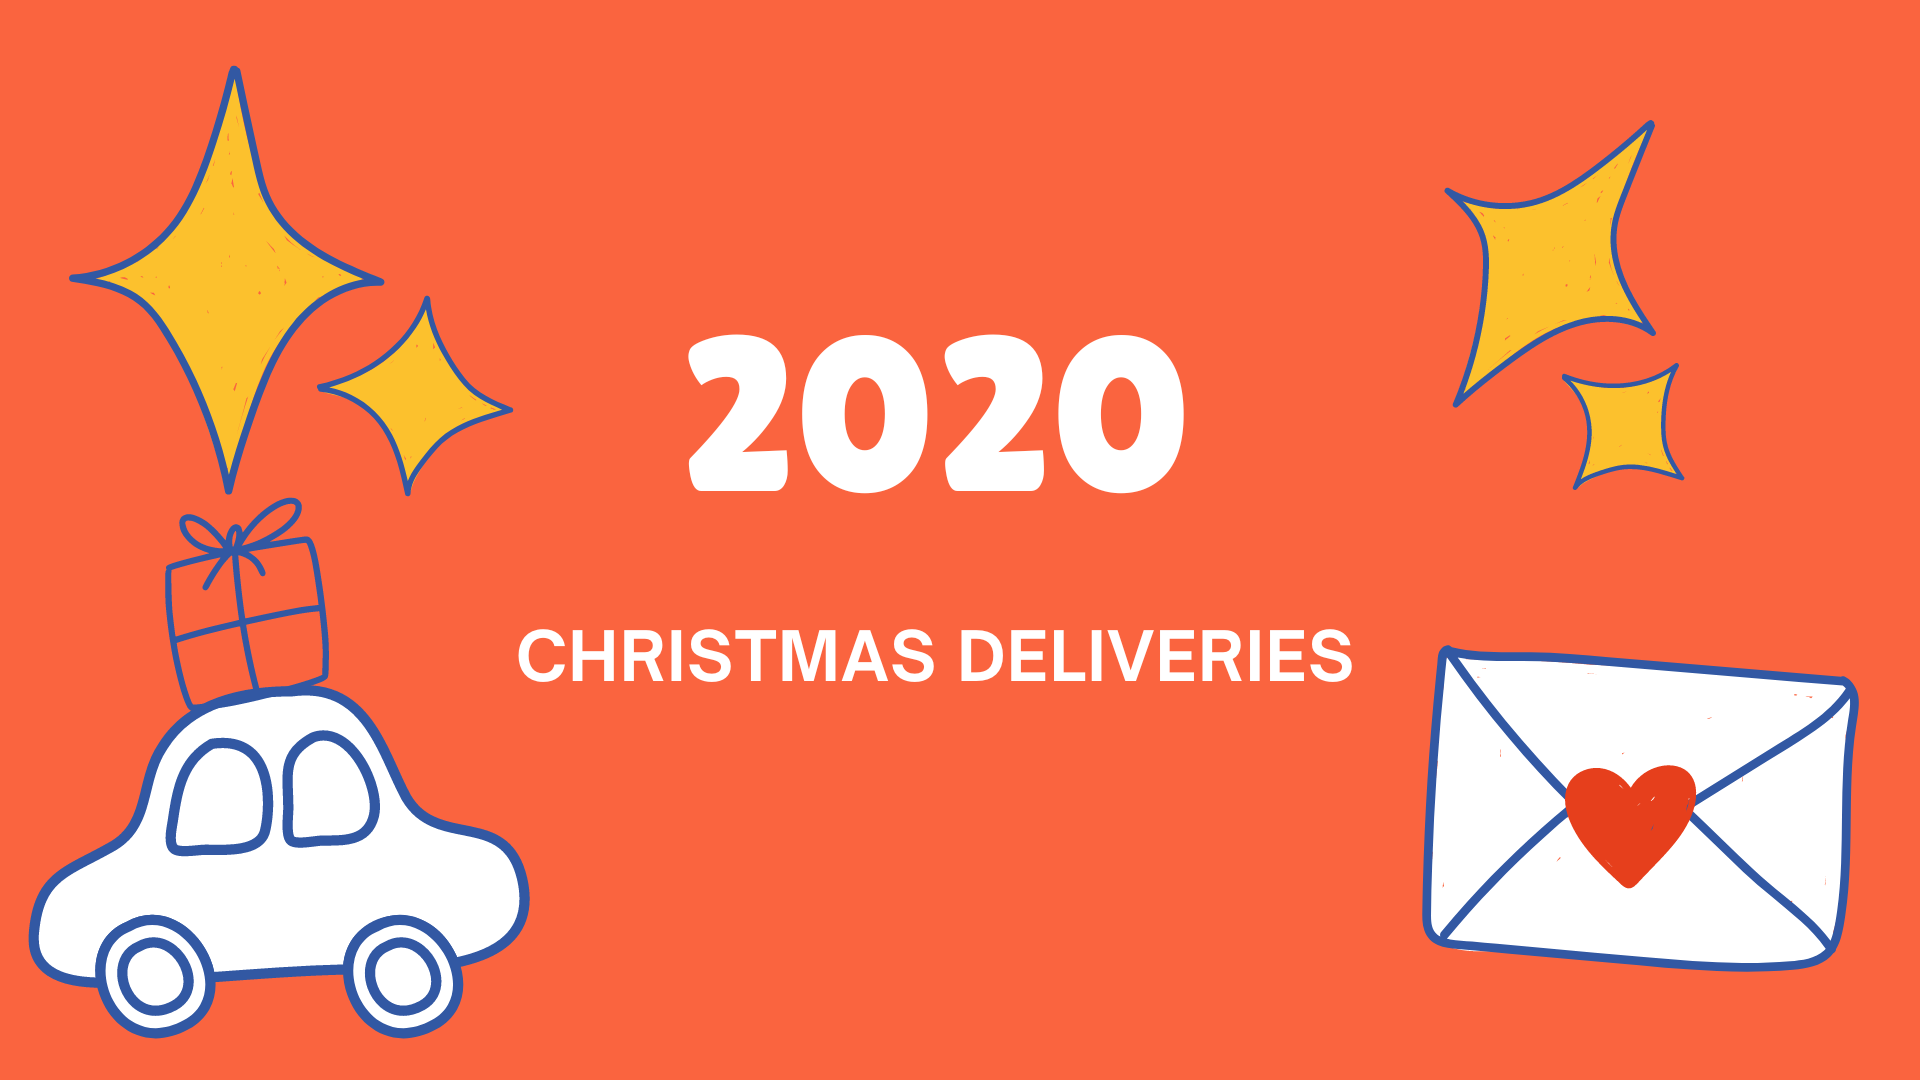 2020 Christmas Deliveries ... this year is a little different